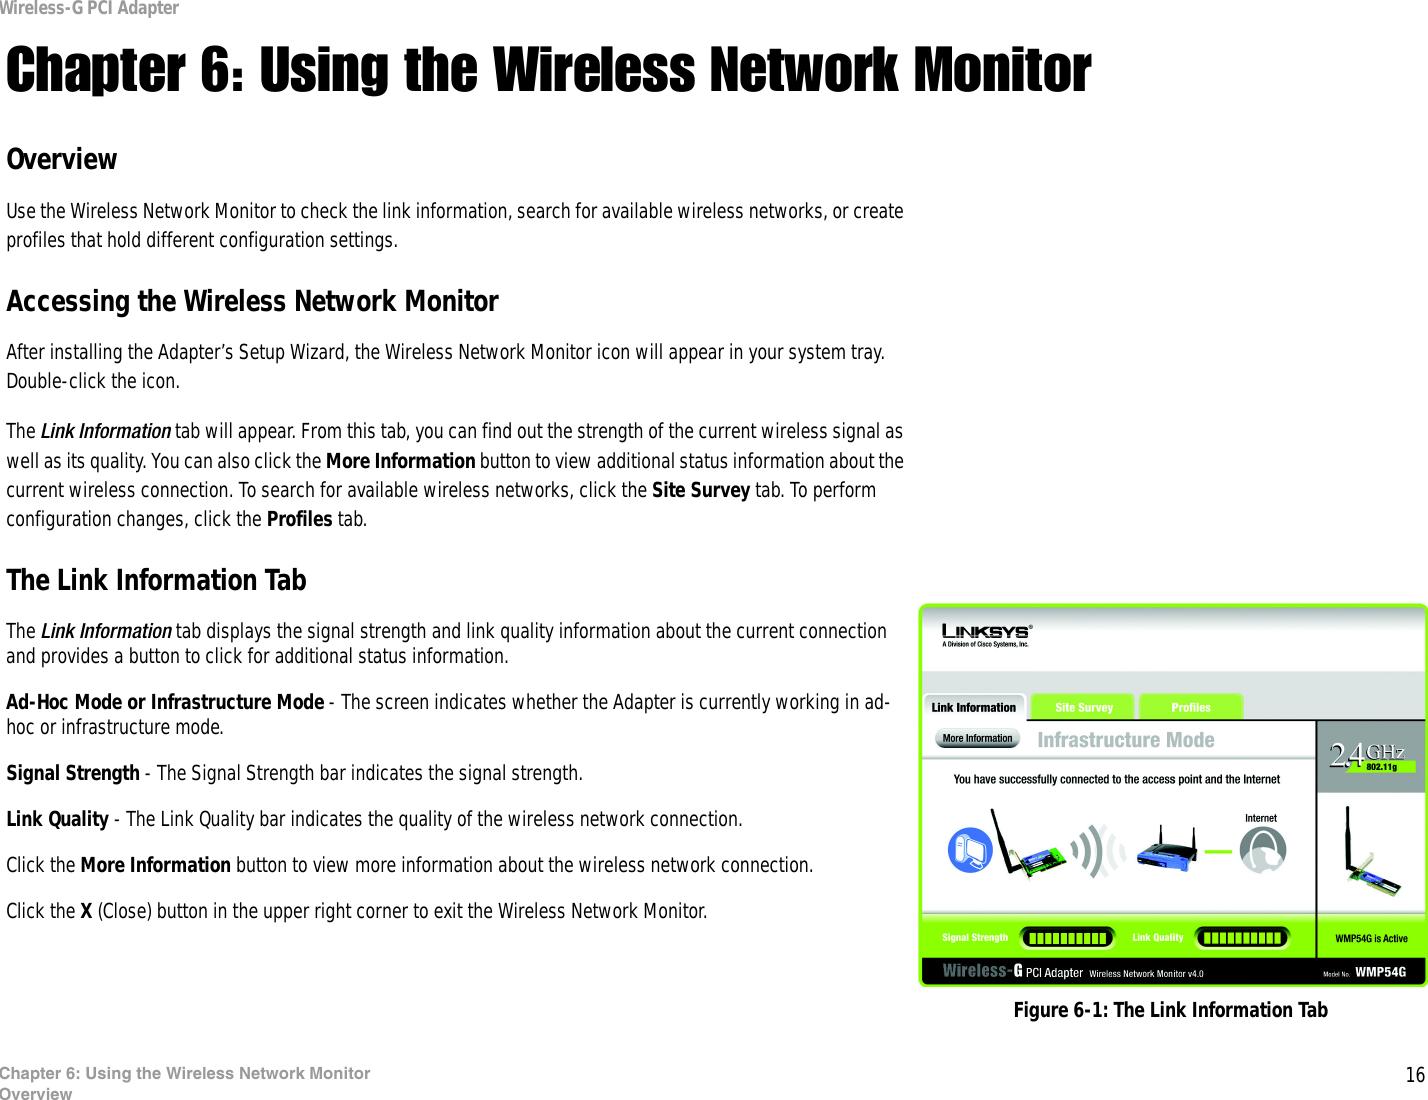 16Chapter 6: Using the Wireless Network MonitorOverviewWireless-G PCI AdapterChapter 6: Using the Wireless Network MonitorOverviewUse the Wireless Network Monitor to check the link information, search for available wireless networks, or create profiles that hold different configuration settings.Accessing the Wireless Network MonitorAfter installing the Adapter’s Setup Wizard, the Wireless Network Monitor icon will appear in your system tray.  Double-click the icon.The Link Information tab will appear. From this tab, you can find out the strength of the current wireless signal as well as its quality. You can also click the More Information button to view additional status information about the current wireless connection. To search for available wireless networks, click the Site Survey tab. To perform configuration changes, click the Profiles tab.The Link Information TabThe Link Information tab displays the signal strength and link quality information about the current connection and provides a button to click for additional status information.  Ad-Hoc Mode or Infrastructure Mode - The screen indicates whether the Adapter is currently working in ad-hoc or infrastructure mode. Signal Strength - The Signal Strength bar indicates the signal strength. Link Quality - The Link Quality bar indicates the quality of the wireless network connection.Click the More Information button to view more information about the wireless network connection.Click the X (Close) button in the upper right corner to exit the Wireless Network Monitor. Figure 6-1: The Link Information Tab